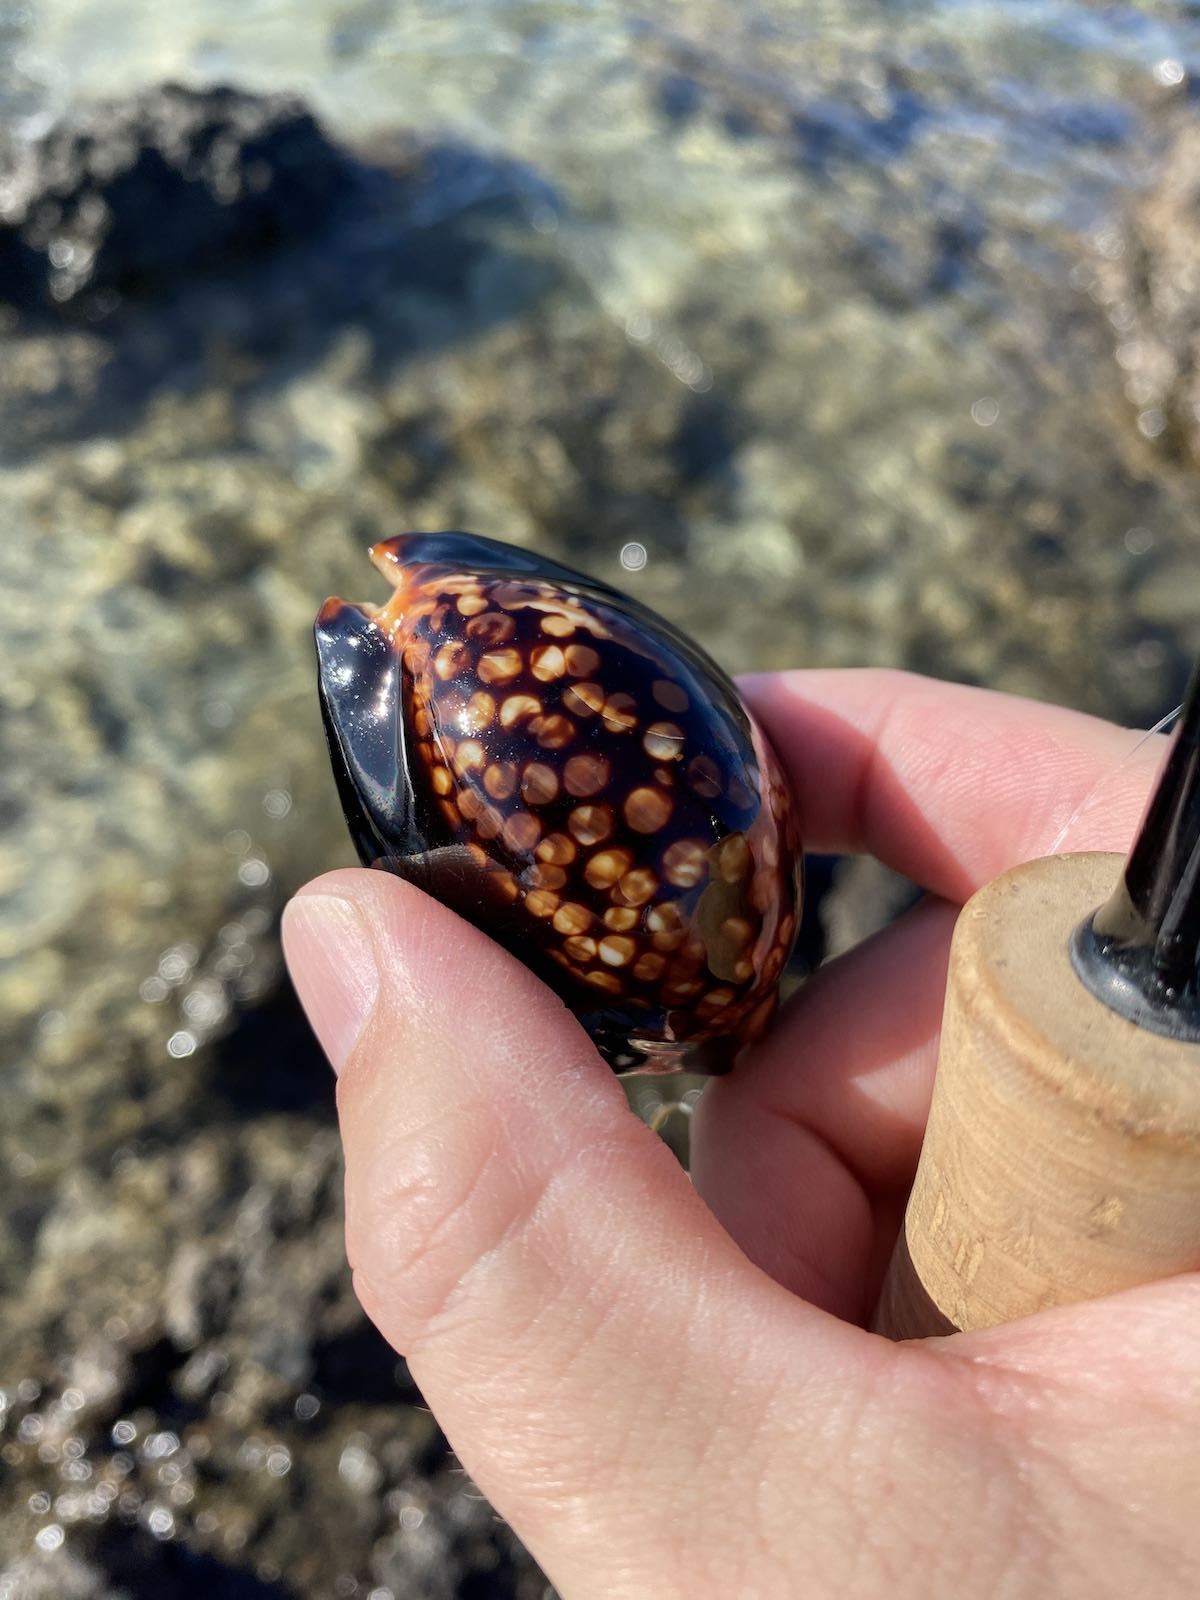 Live cowrie found while fishing in Hawaii